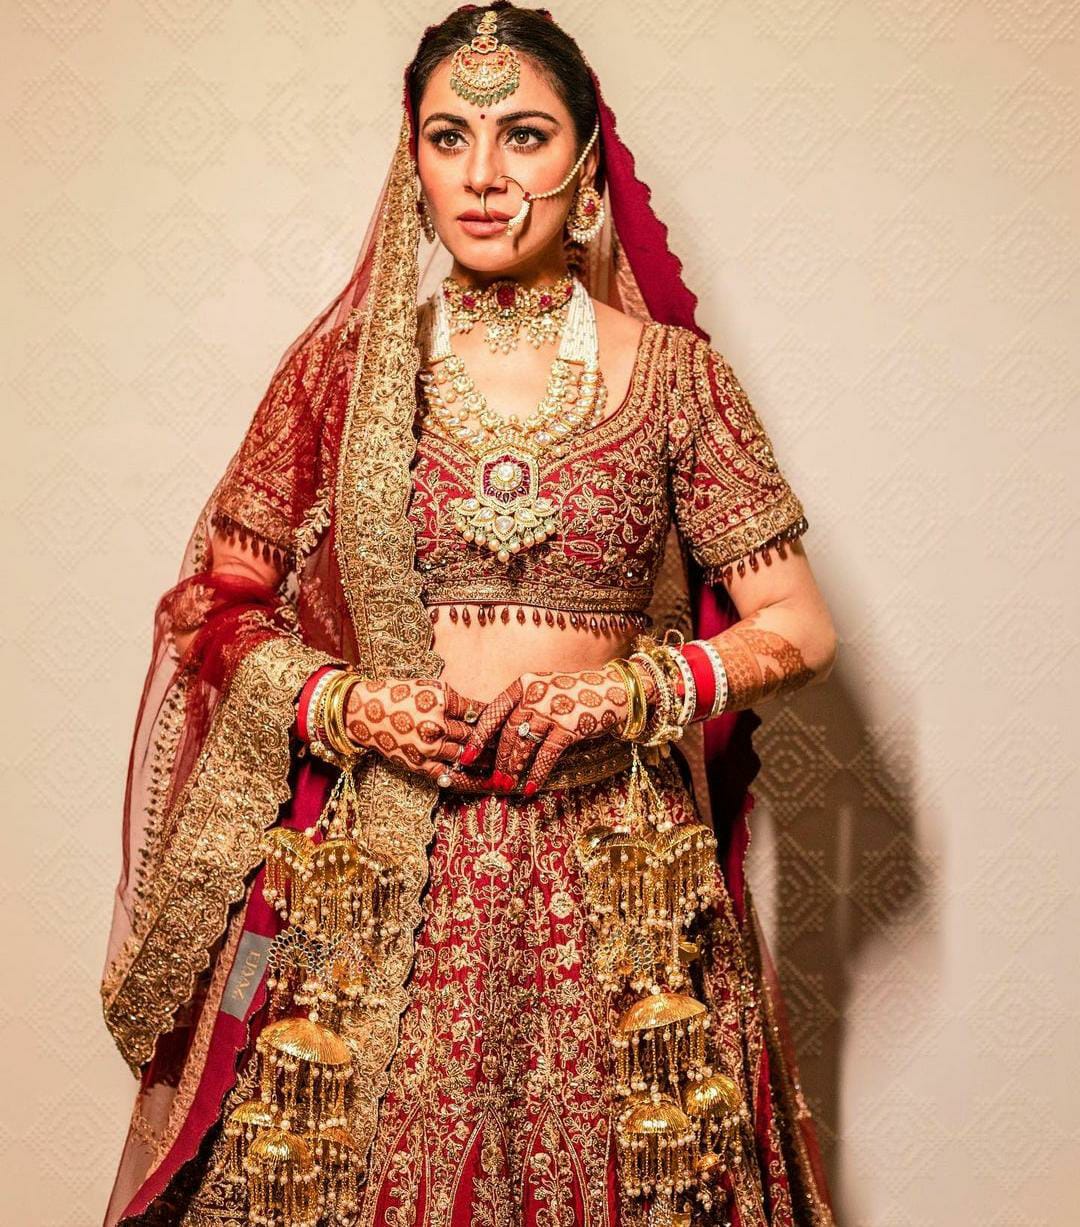 bollywood actress bridal look,recently married tv actress 2022,deepika bridal look,tv actress who got married in 2020,tv actress who got married in 2021,south indian actress in bridal look,tv actress who got married in 2022,recent tv actress marriage 2022,bridal look,bridal looks,tv actress bridal look